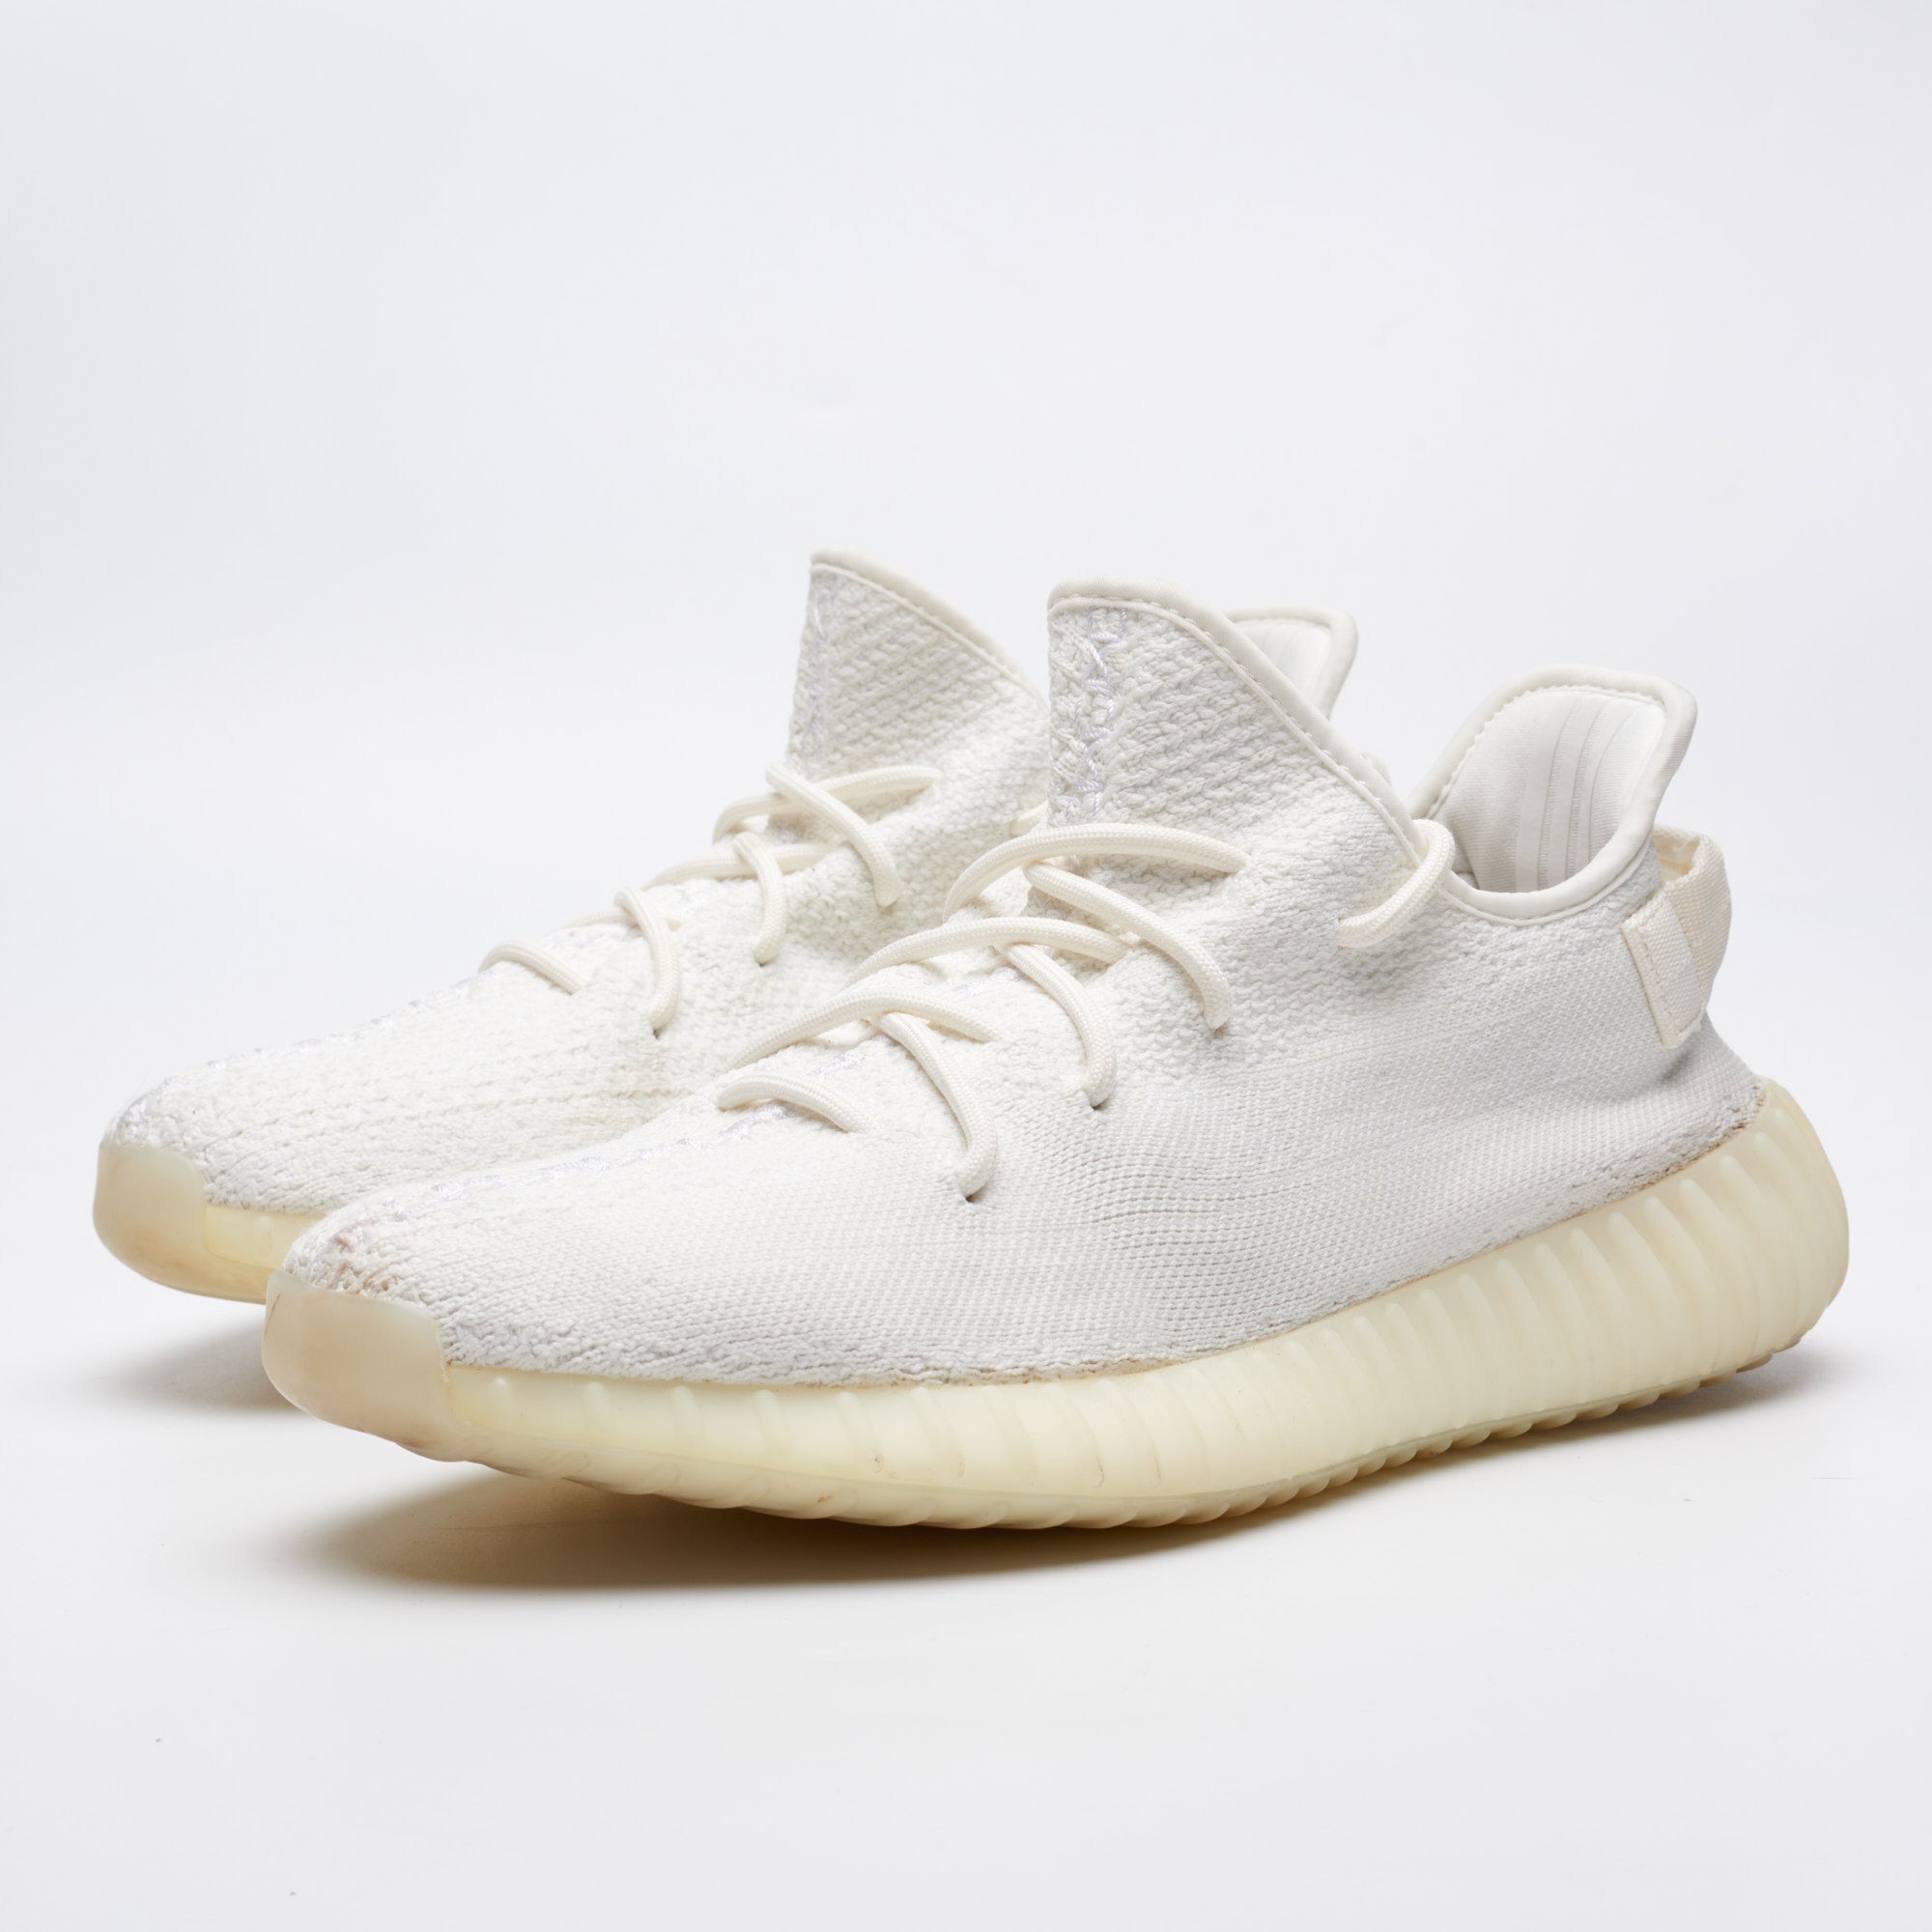 ADIDAS YEEZY BOOST 350 V2 Cream Triple White Sneakers Shoes UK 9.5 US 10 ADIDAS